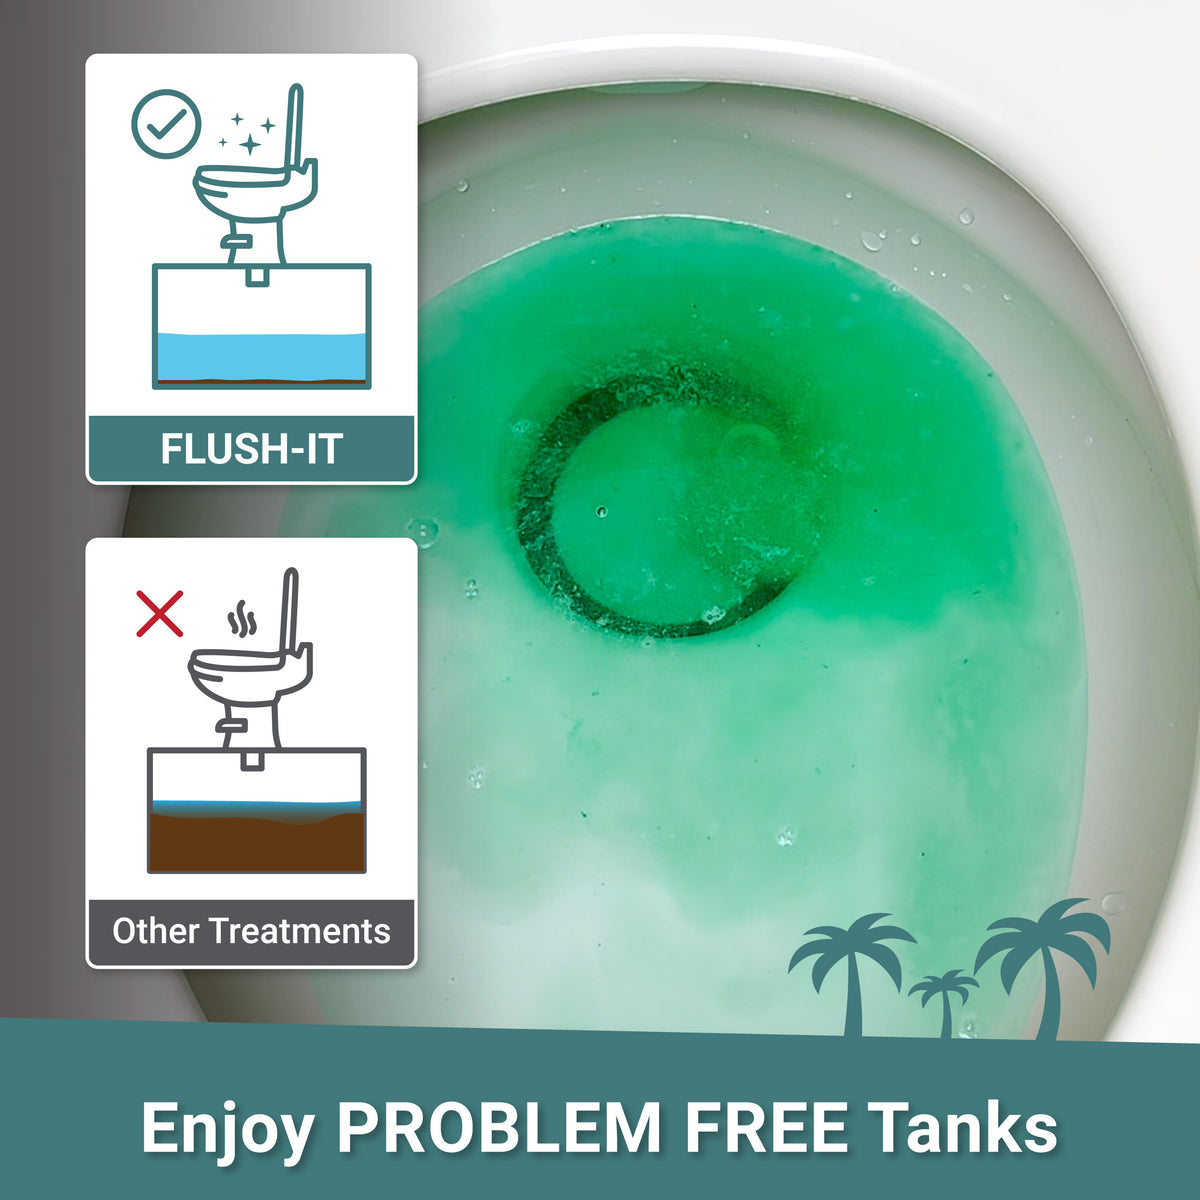 Enjoy problem free tanks with Flush-It 2-in-1 Toilet Cleaner + Black Tank Treatment. Unique Camping + Marine